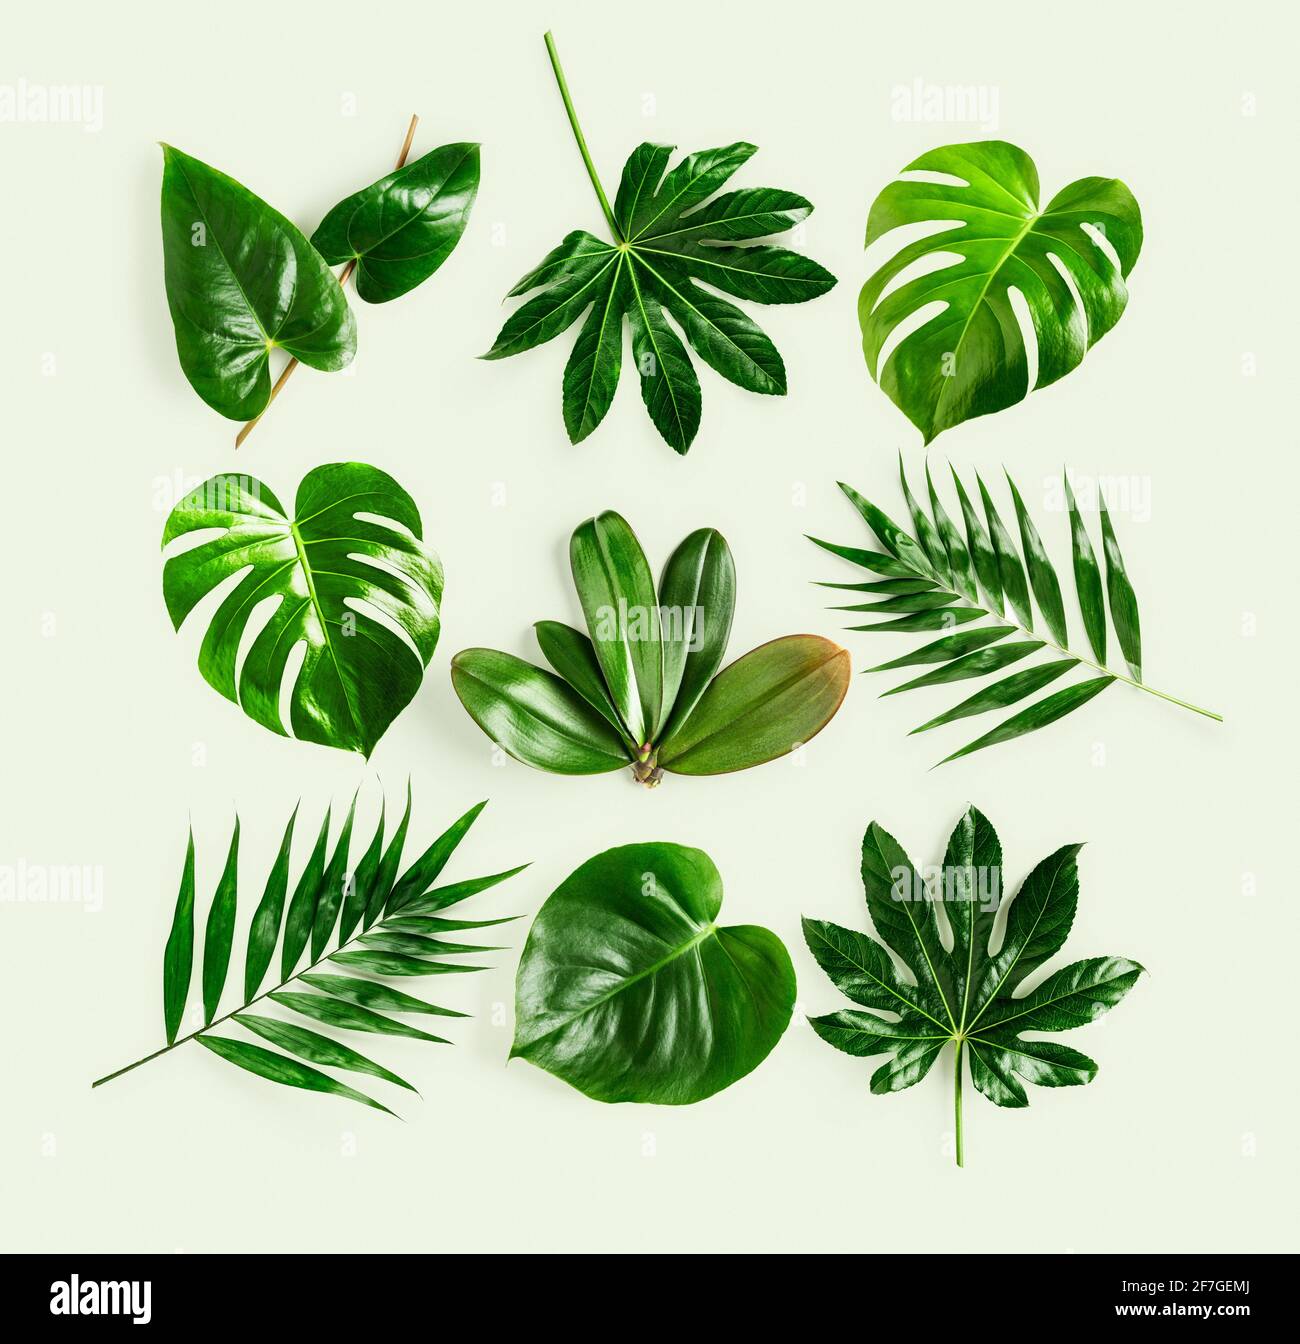 Tropical jungle monstera, orchid, palm, aralia and flamingo green leaves creative pattern and composition on green background. Floral design element. Stock Photo